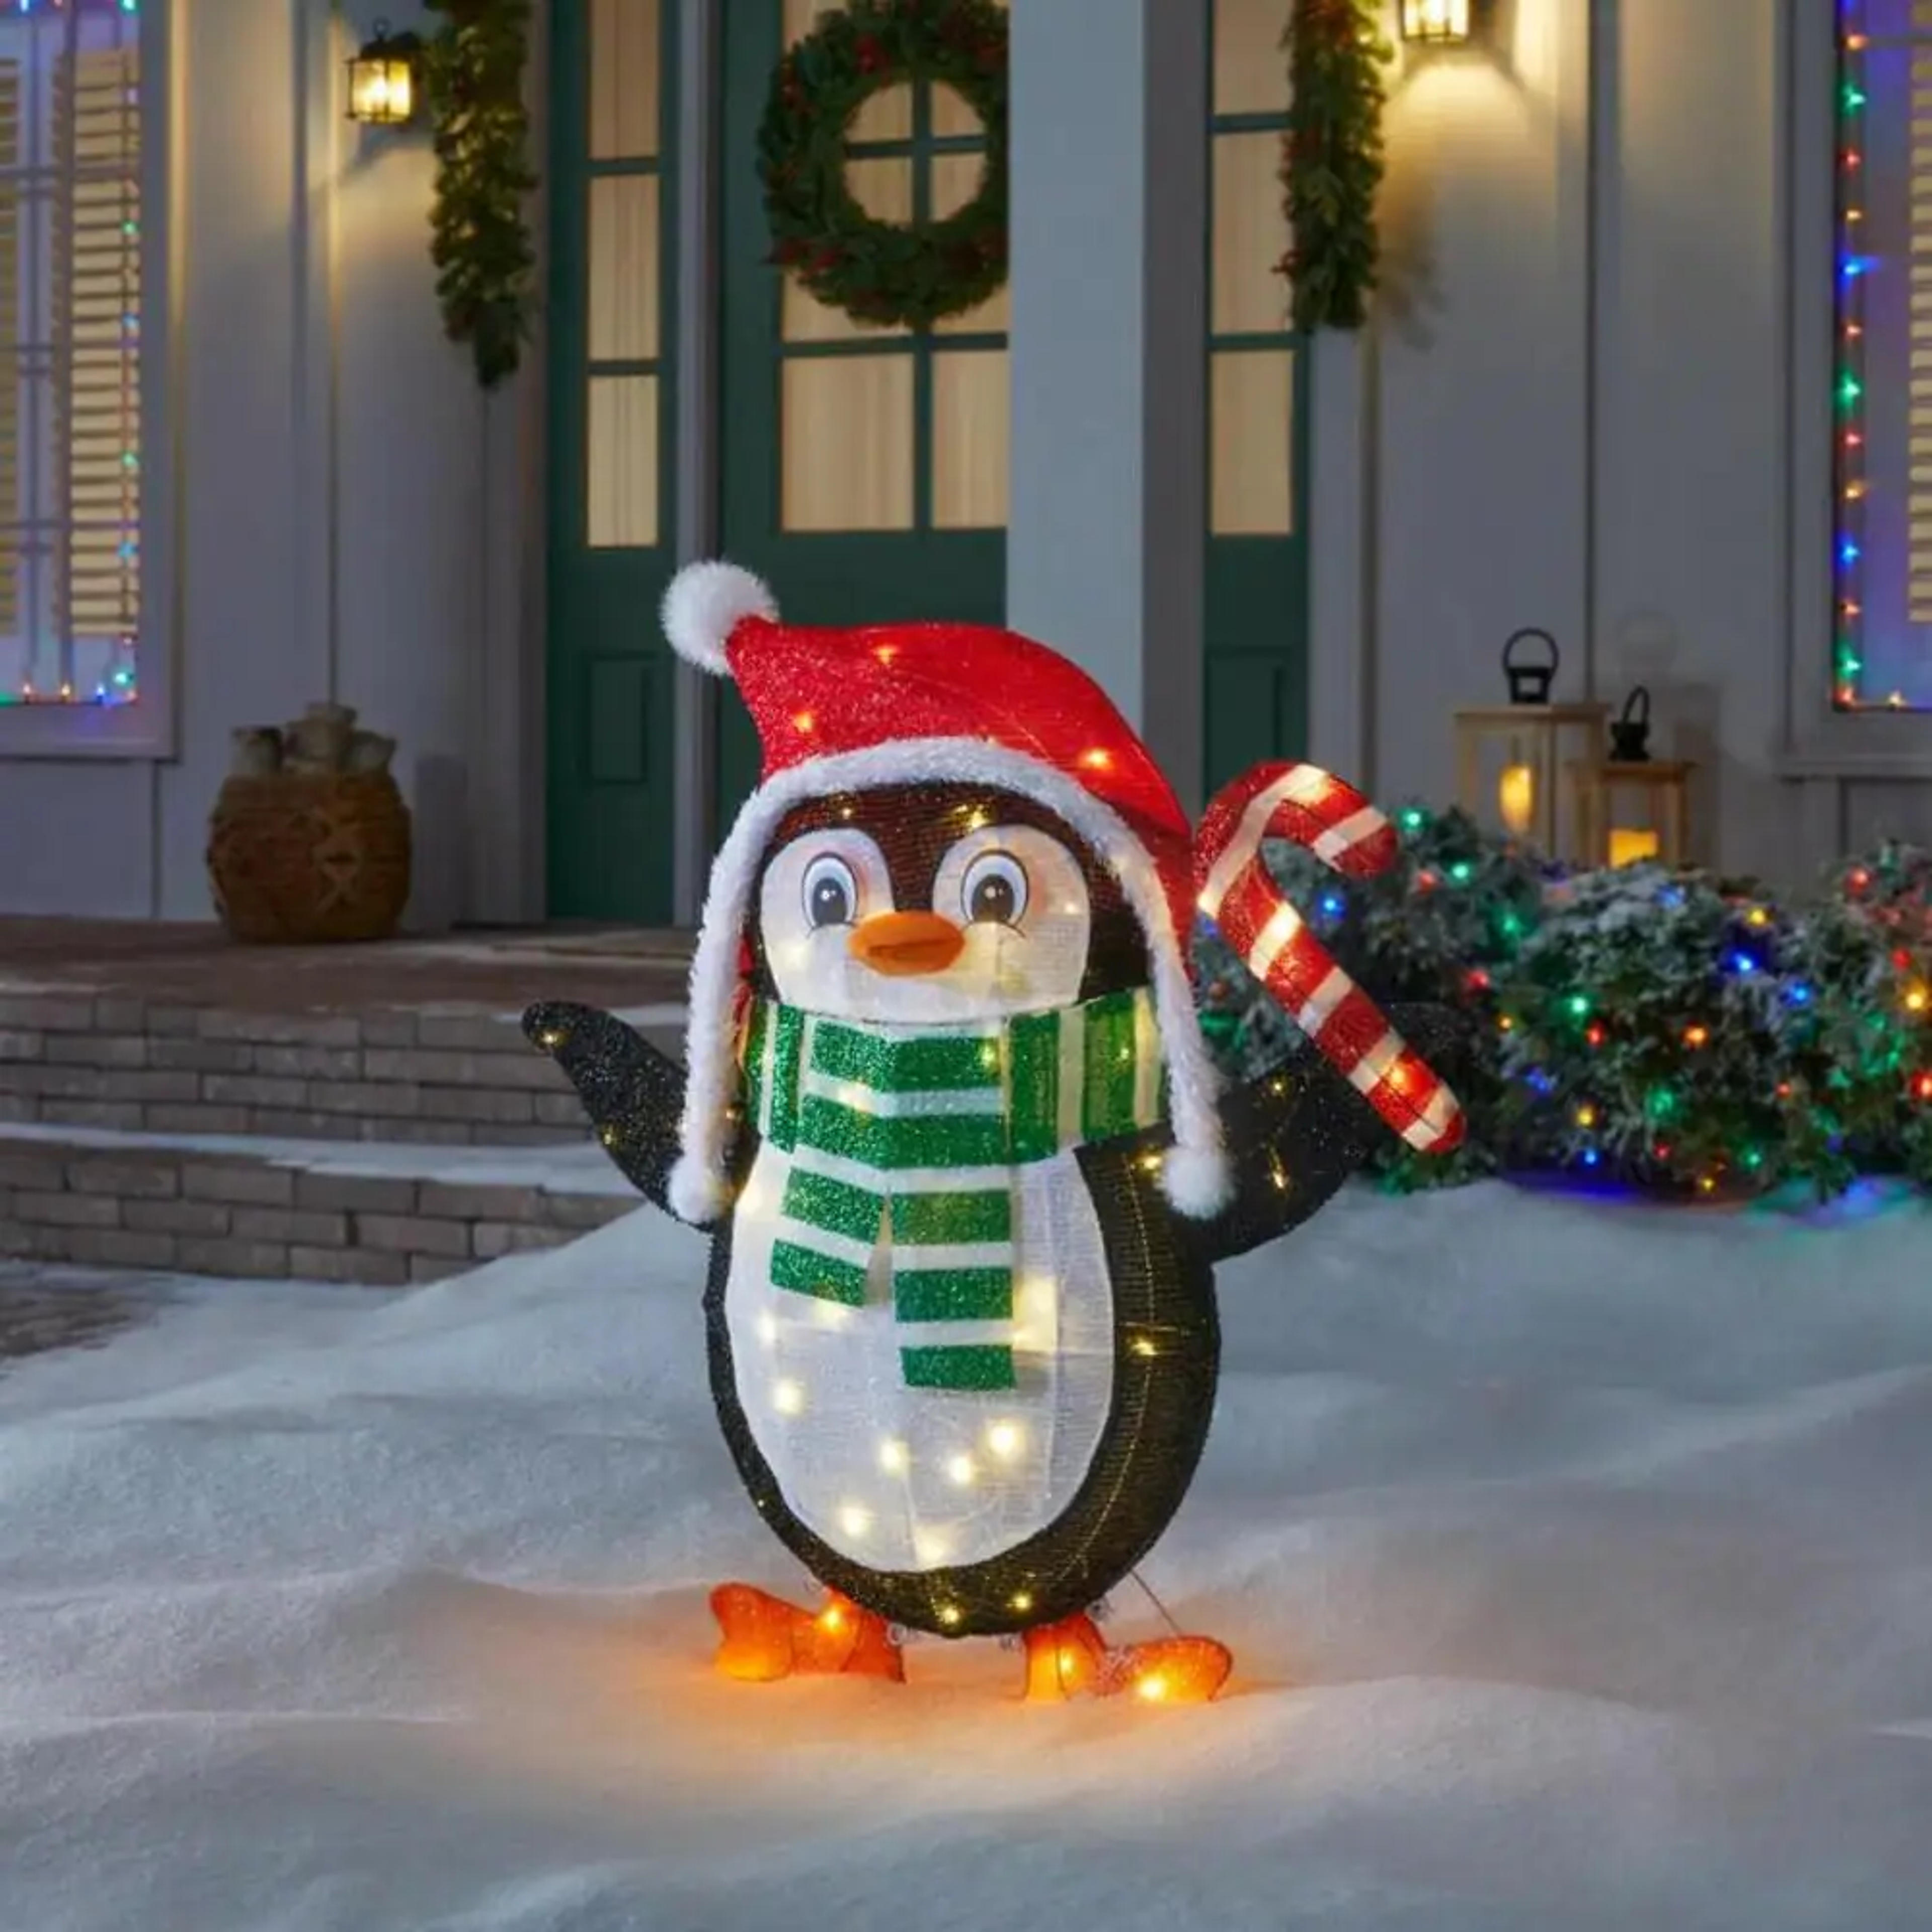 Home Accents Holiday 3 ft Warm White LED Penguin in with Candy Cane Holiday Yard Decoration 22RT1962214 - The Home Depot